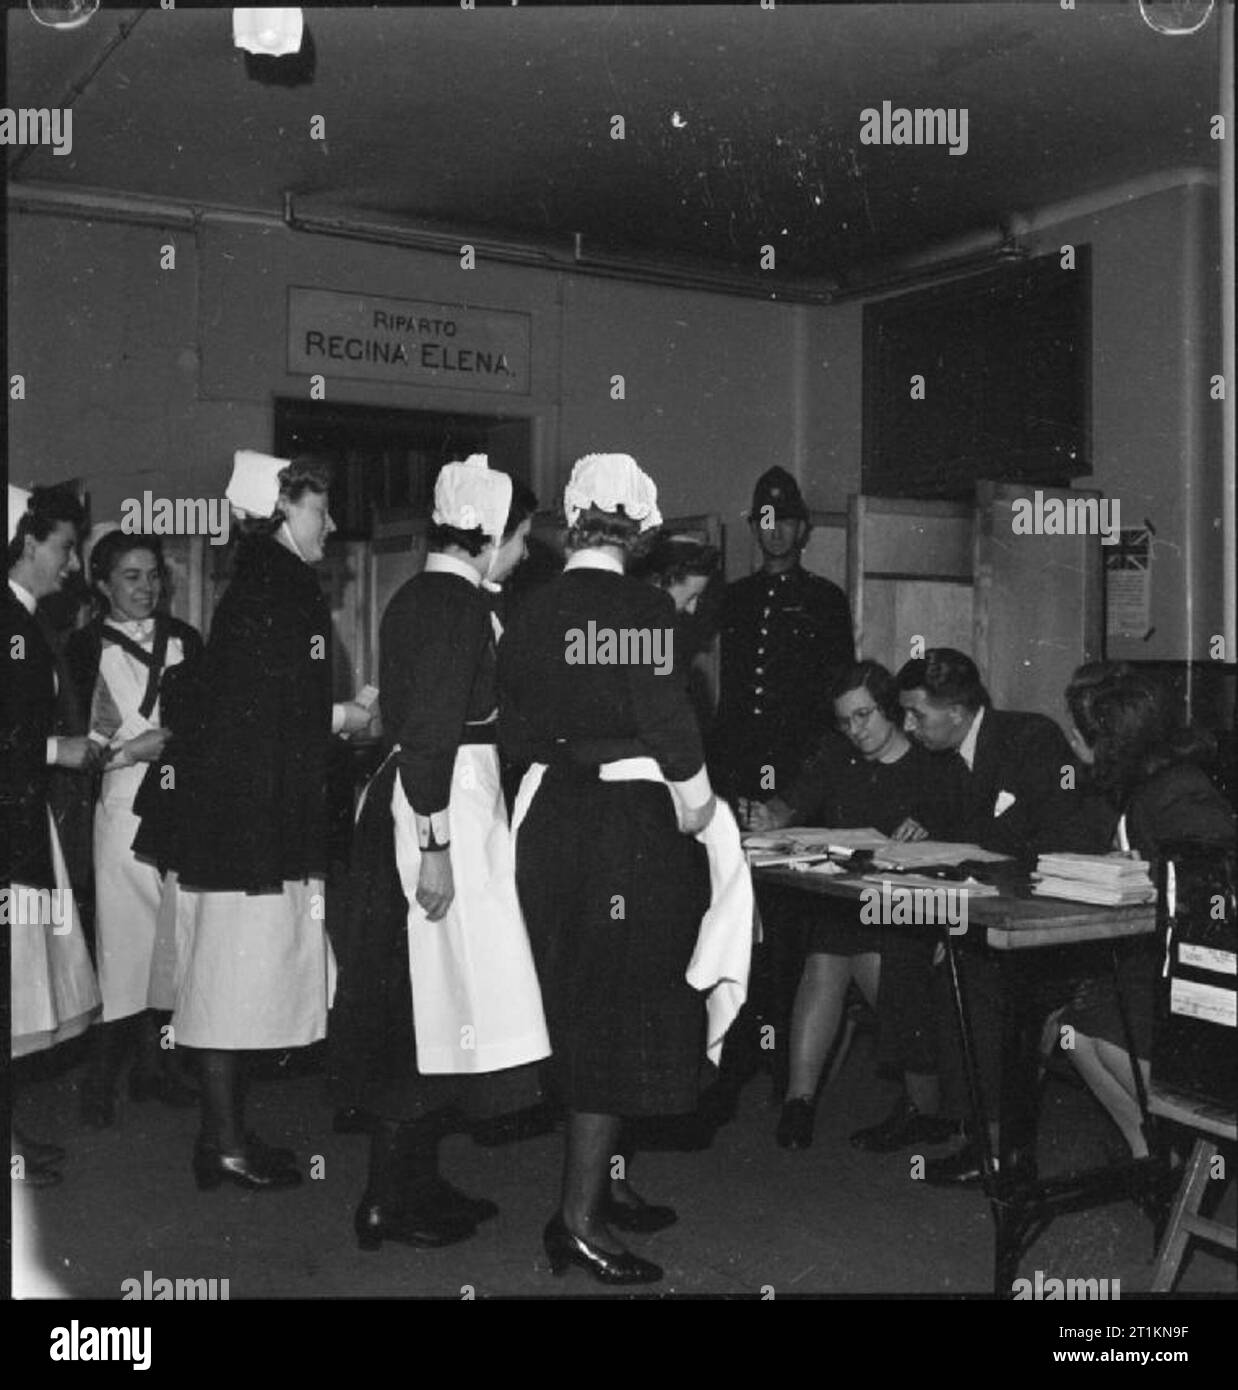 Londoners Record Their Vote on National Polling Day, Holborn, London, England, UK, 5 July 1945 A group of nurses from the nearby Great Ormond Street Hospital arrive at the polling station to cast their vote in the General Election. A policeman can be seen in the background, keeping an eye on proceedings, as the nurses are handed their ballot papers by officials. The pooling booths can be seen behind the policeman. This polling station is at the Italian Hospital, Queen Square, Holborn. Stock Photo